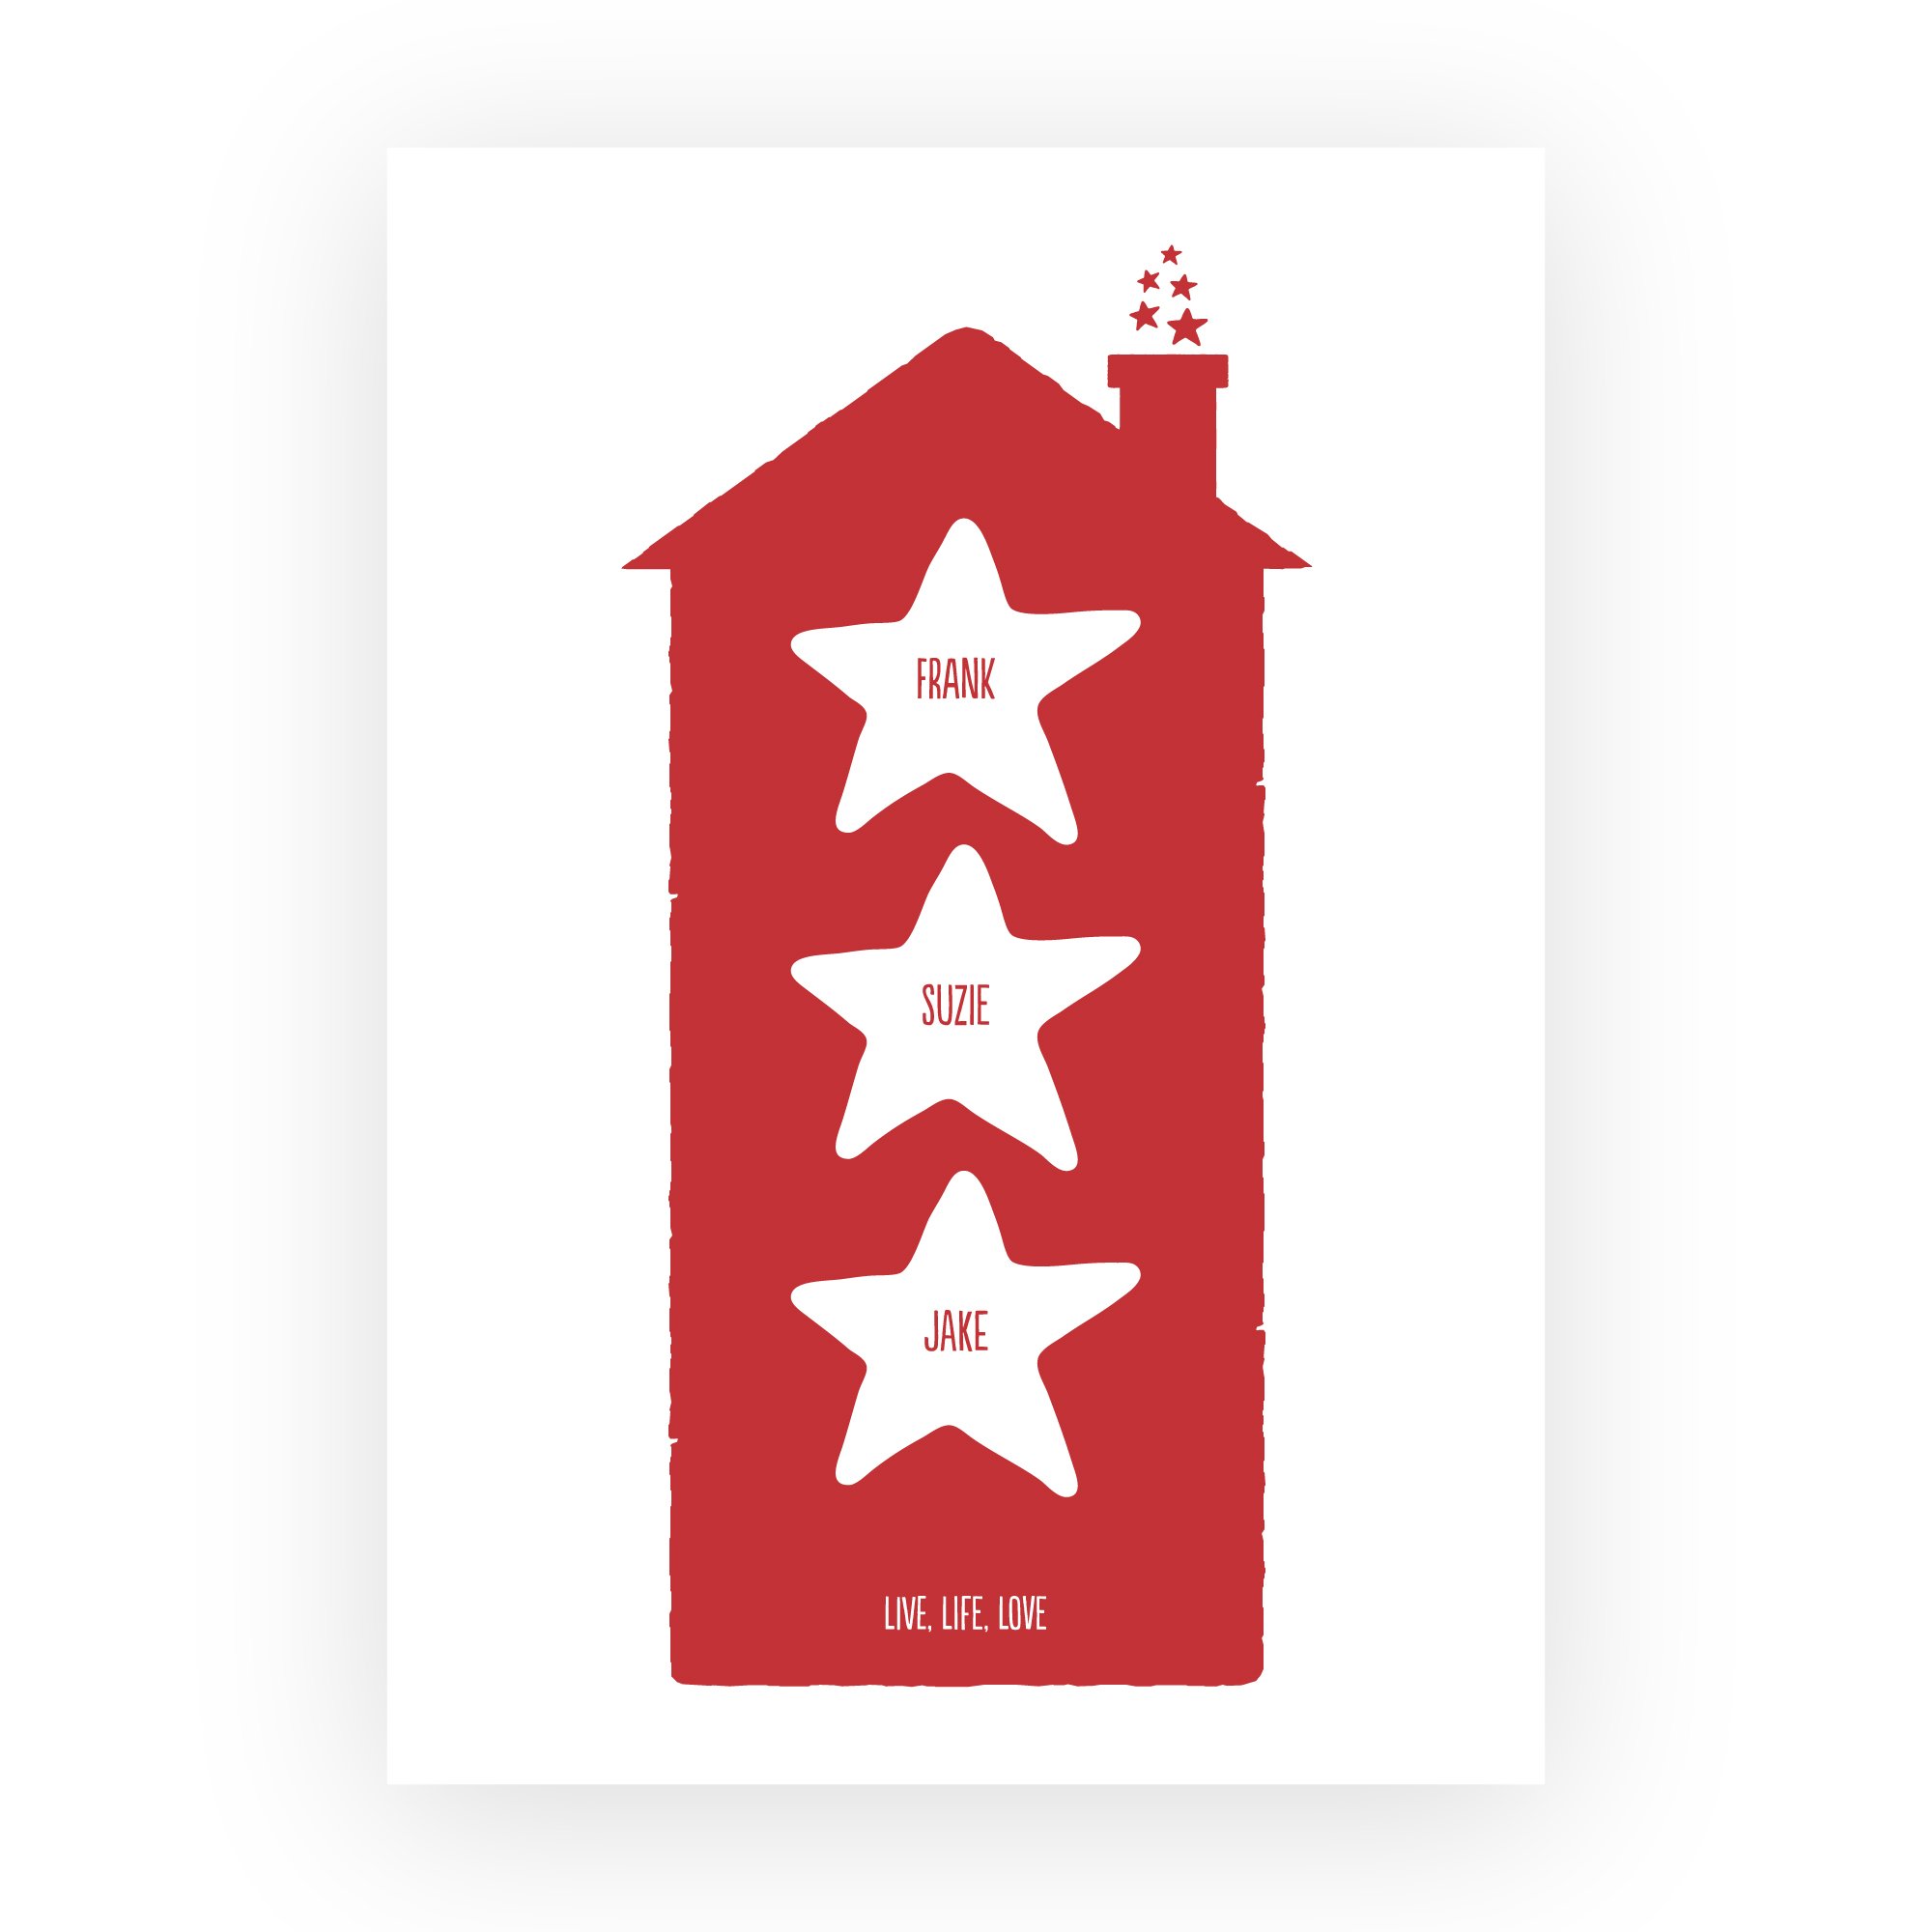 Family-Home-House-PrinFamily-Home-House-Print-with-Starst-with-Stars